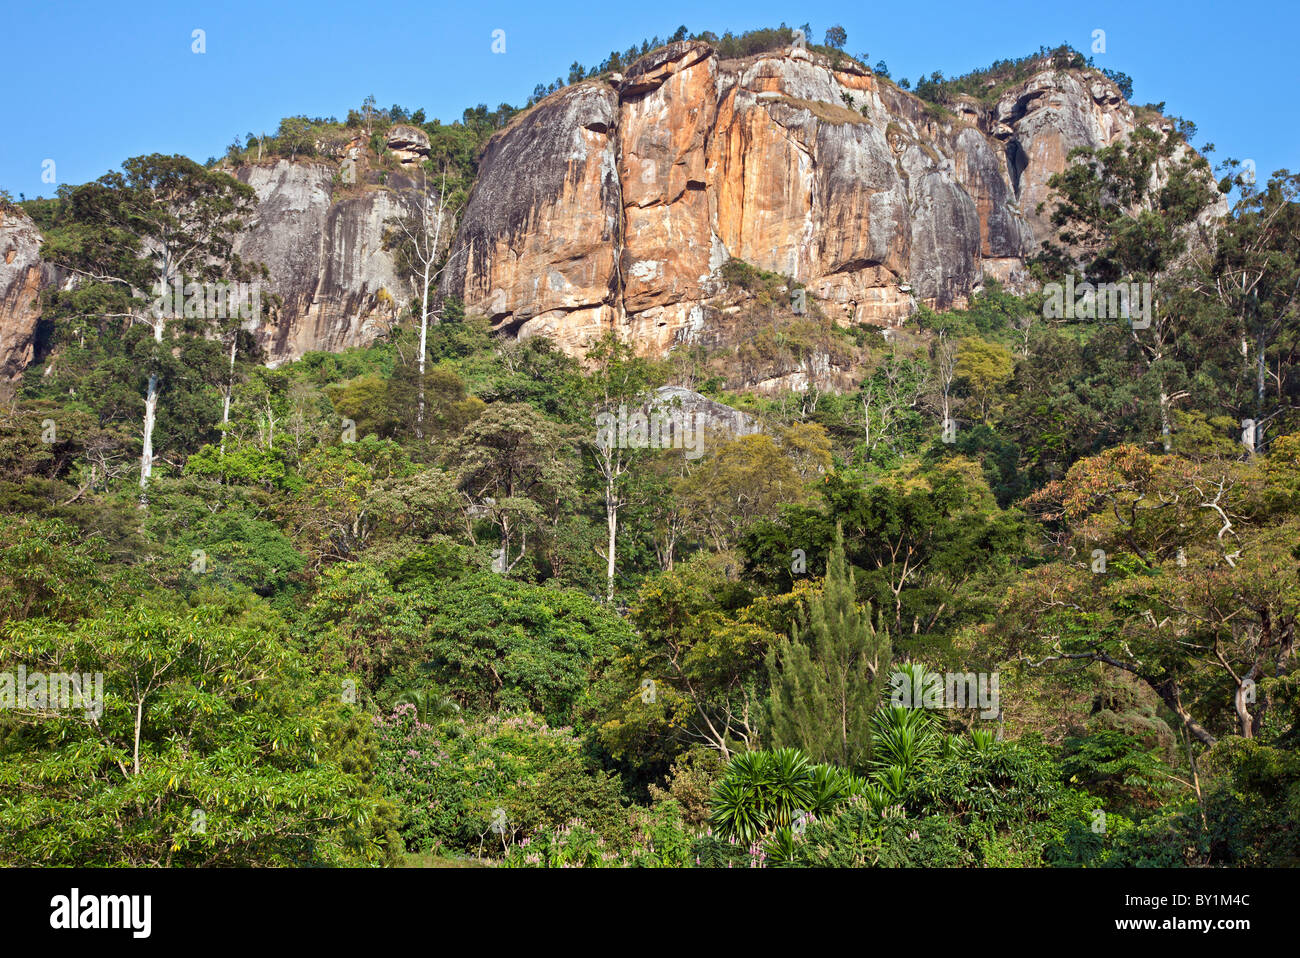 A large rock face in the Western Arc of the Usambara Mountains near Soni. Stock Photo